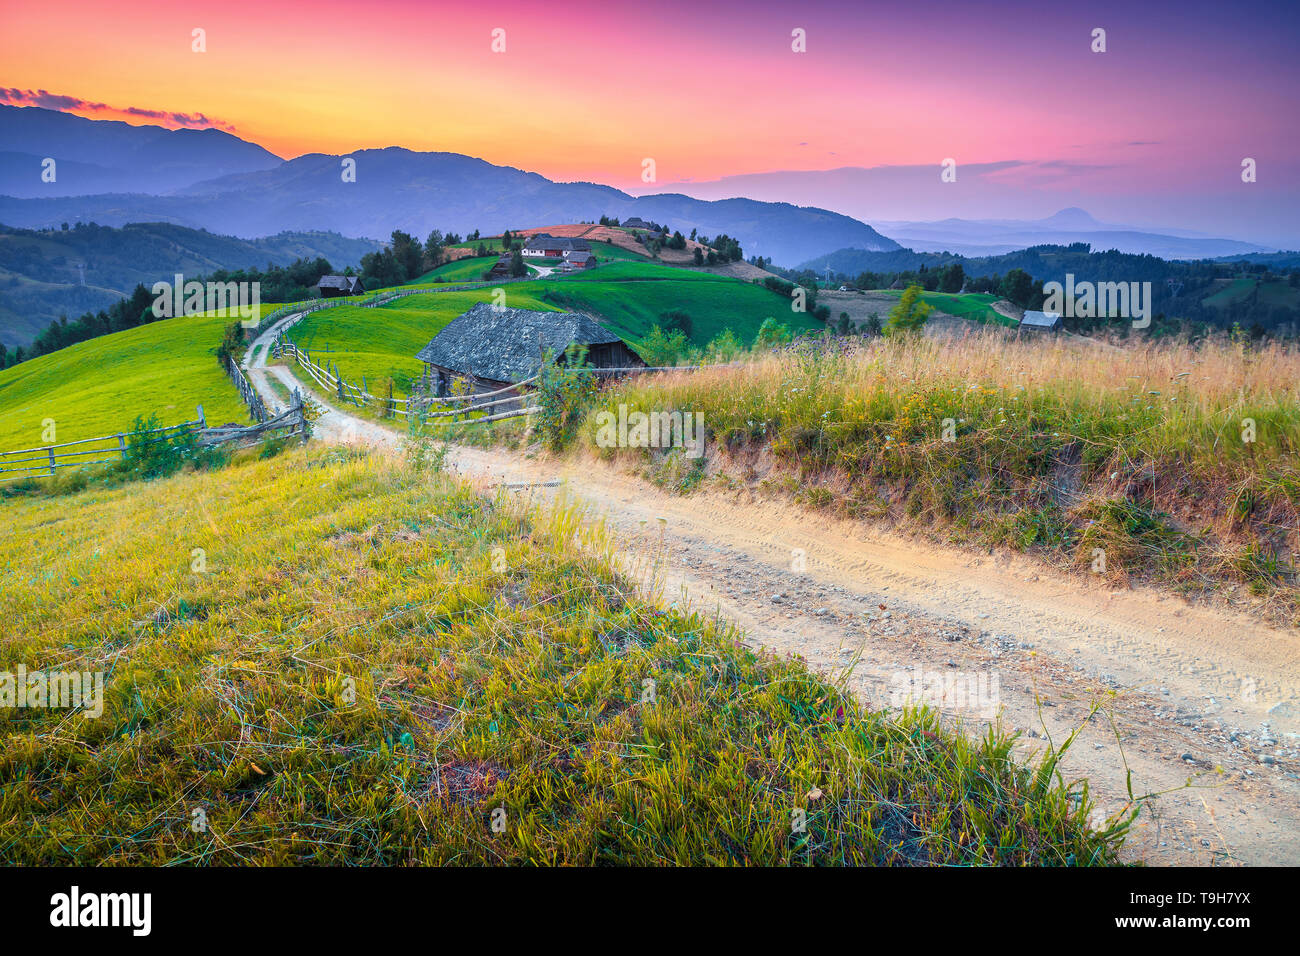 Amazing travel location, summer countryside landscape, green fields and wooden houses with gardens at sunset, Bran, Transylvania, Romania, Europe Stock Photo